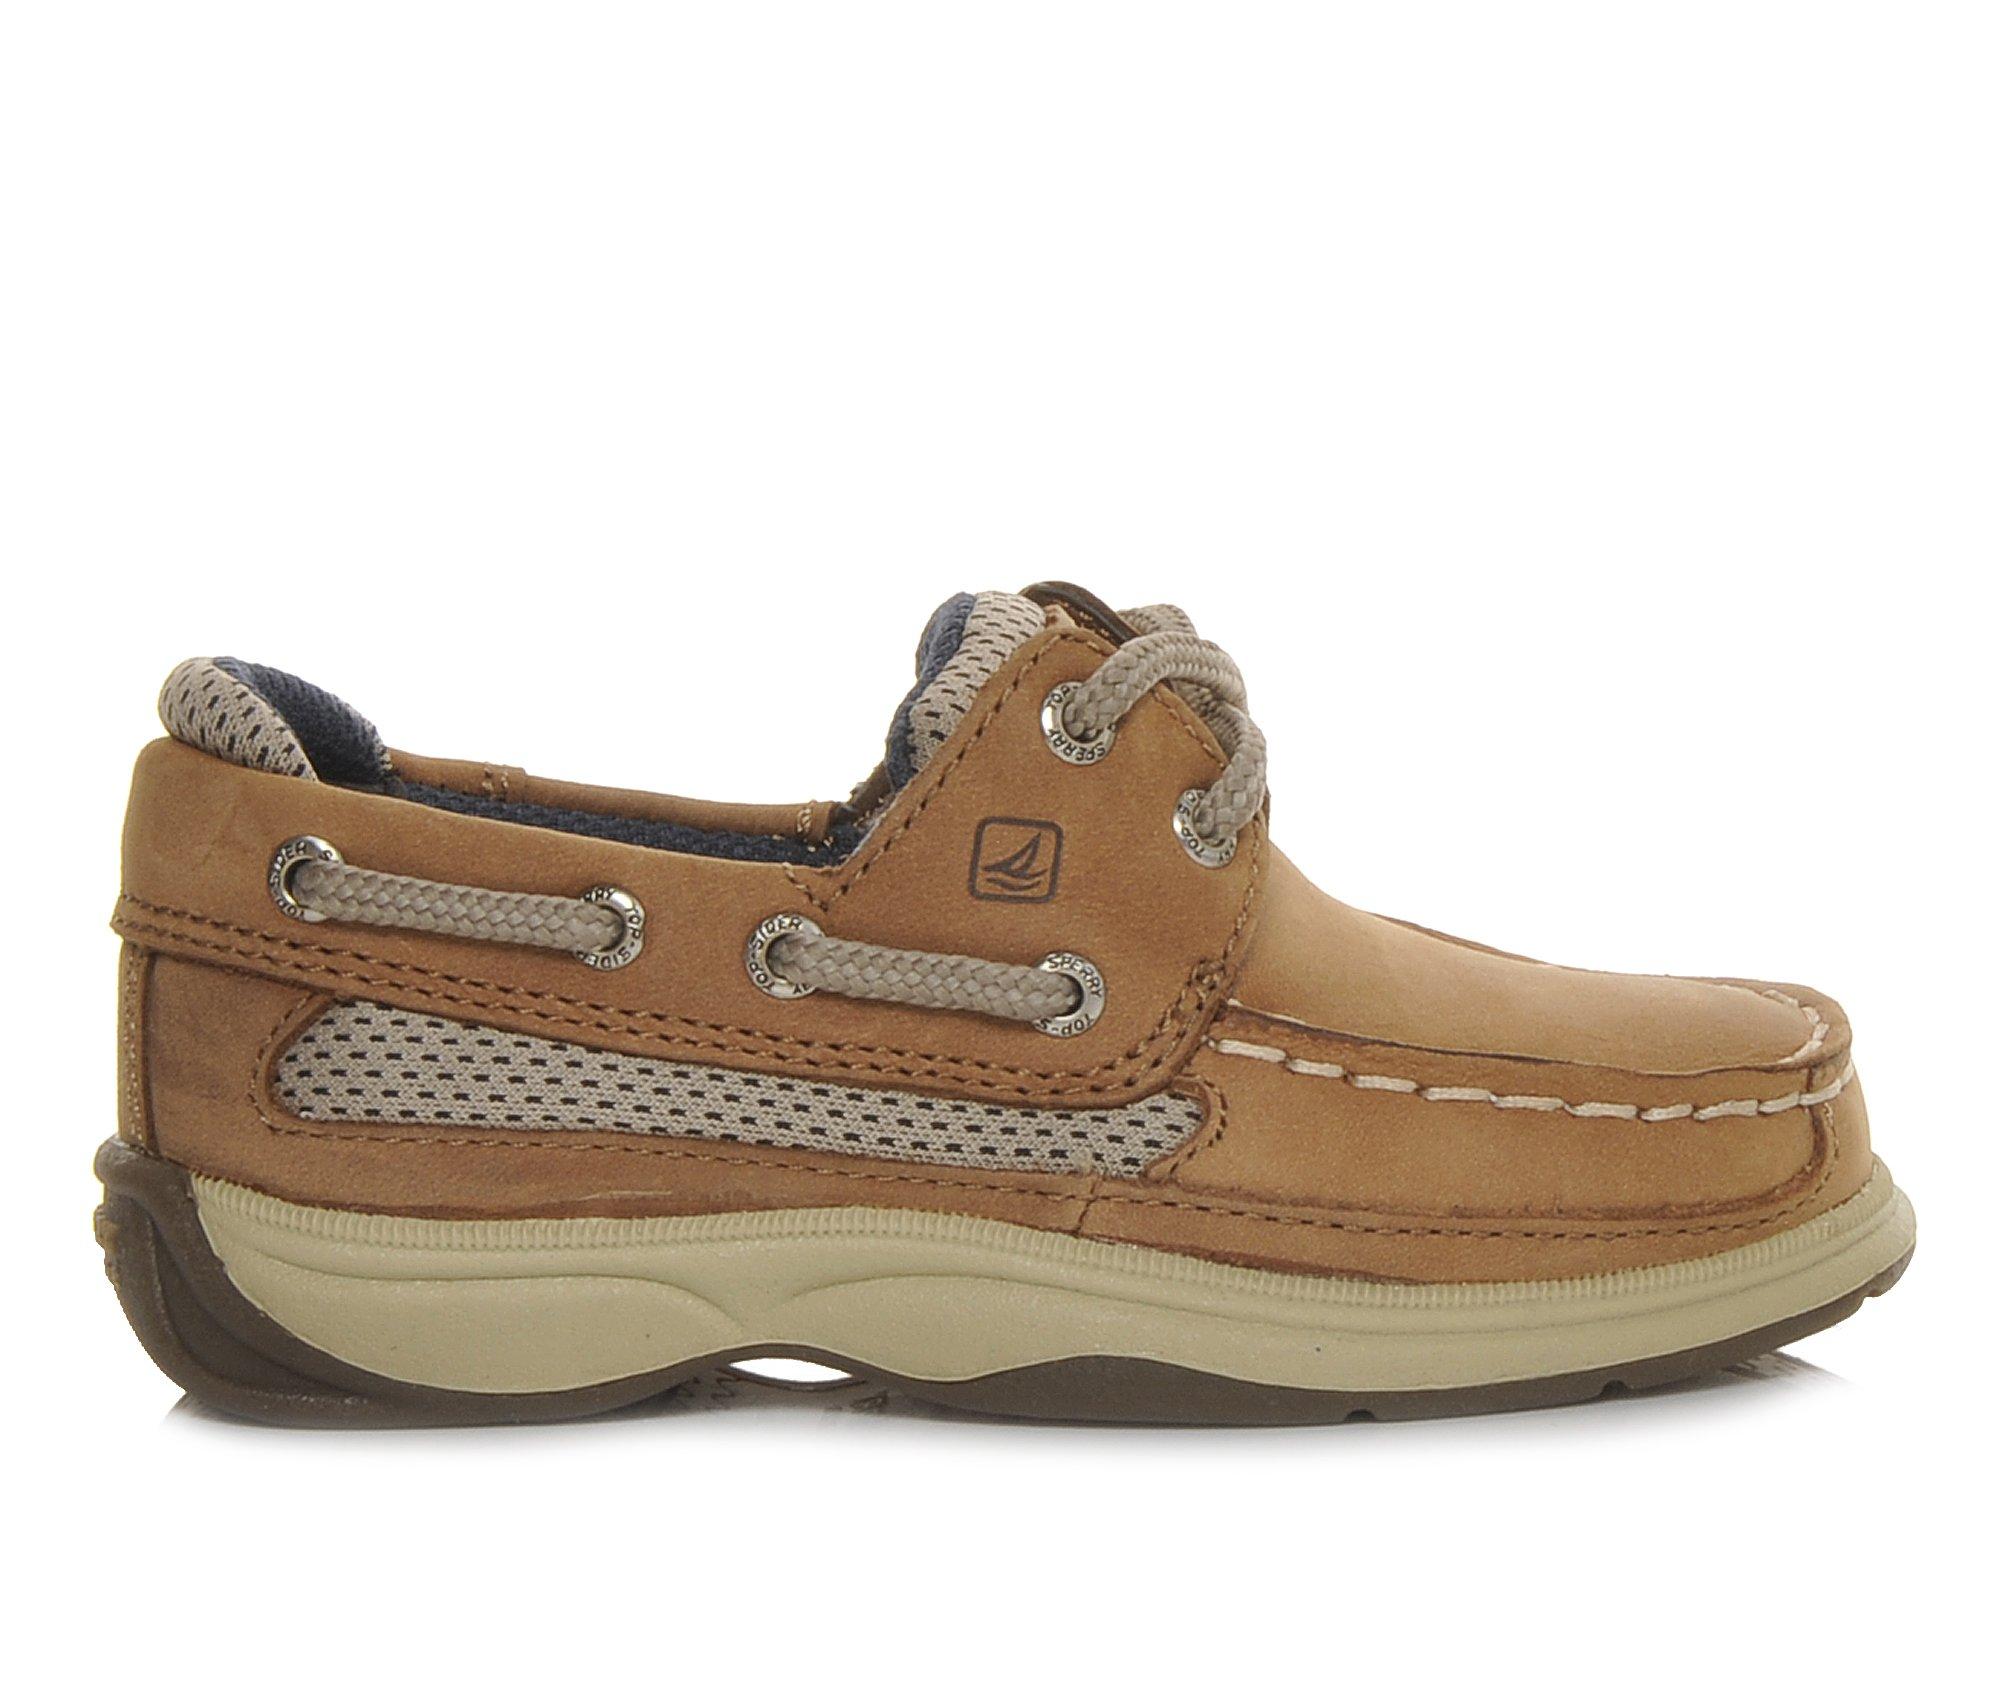 Boys' Sperry Toddler & Little Kid Lanyard Boat Shoes